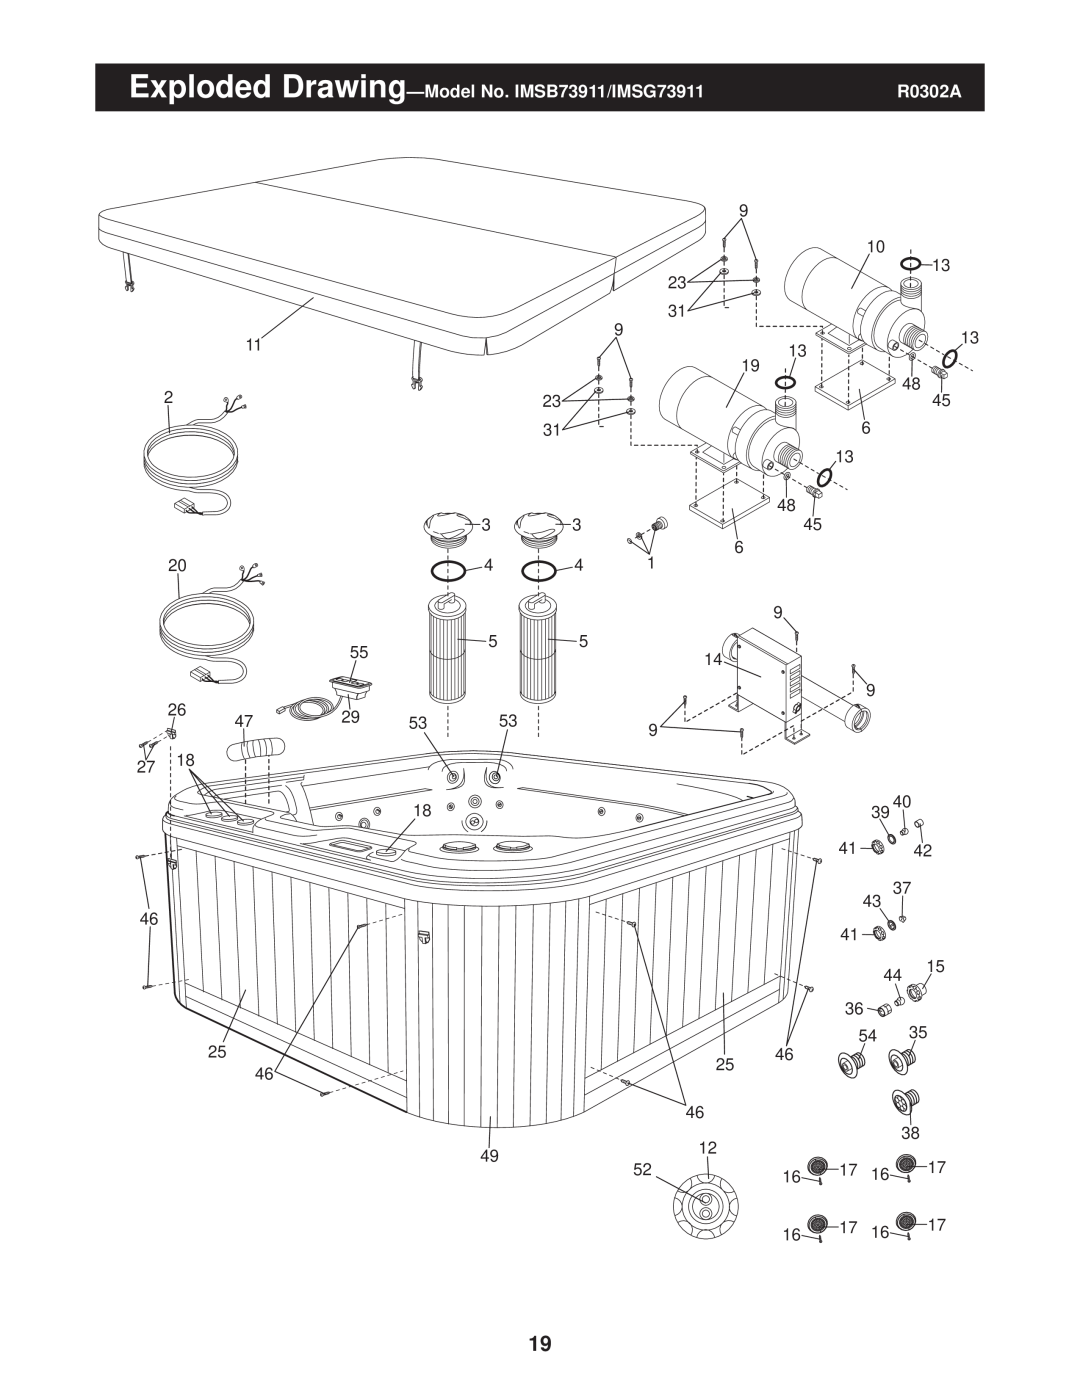 Image user manual Exploded Drawing-Model No. IMSB73911/IMSG73911, R0302A 